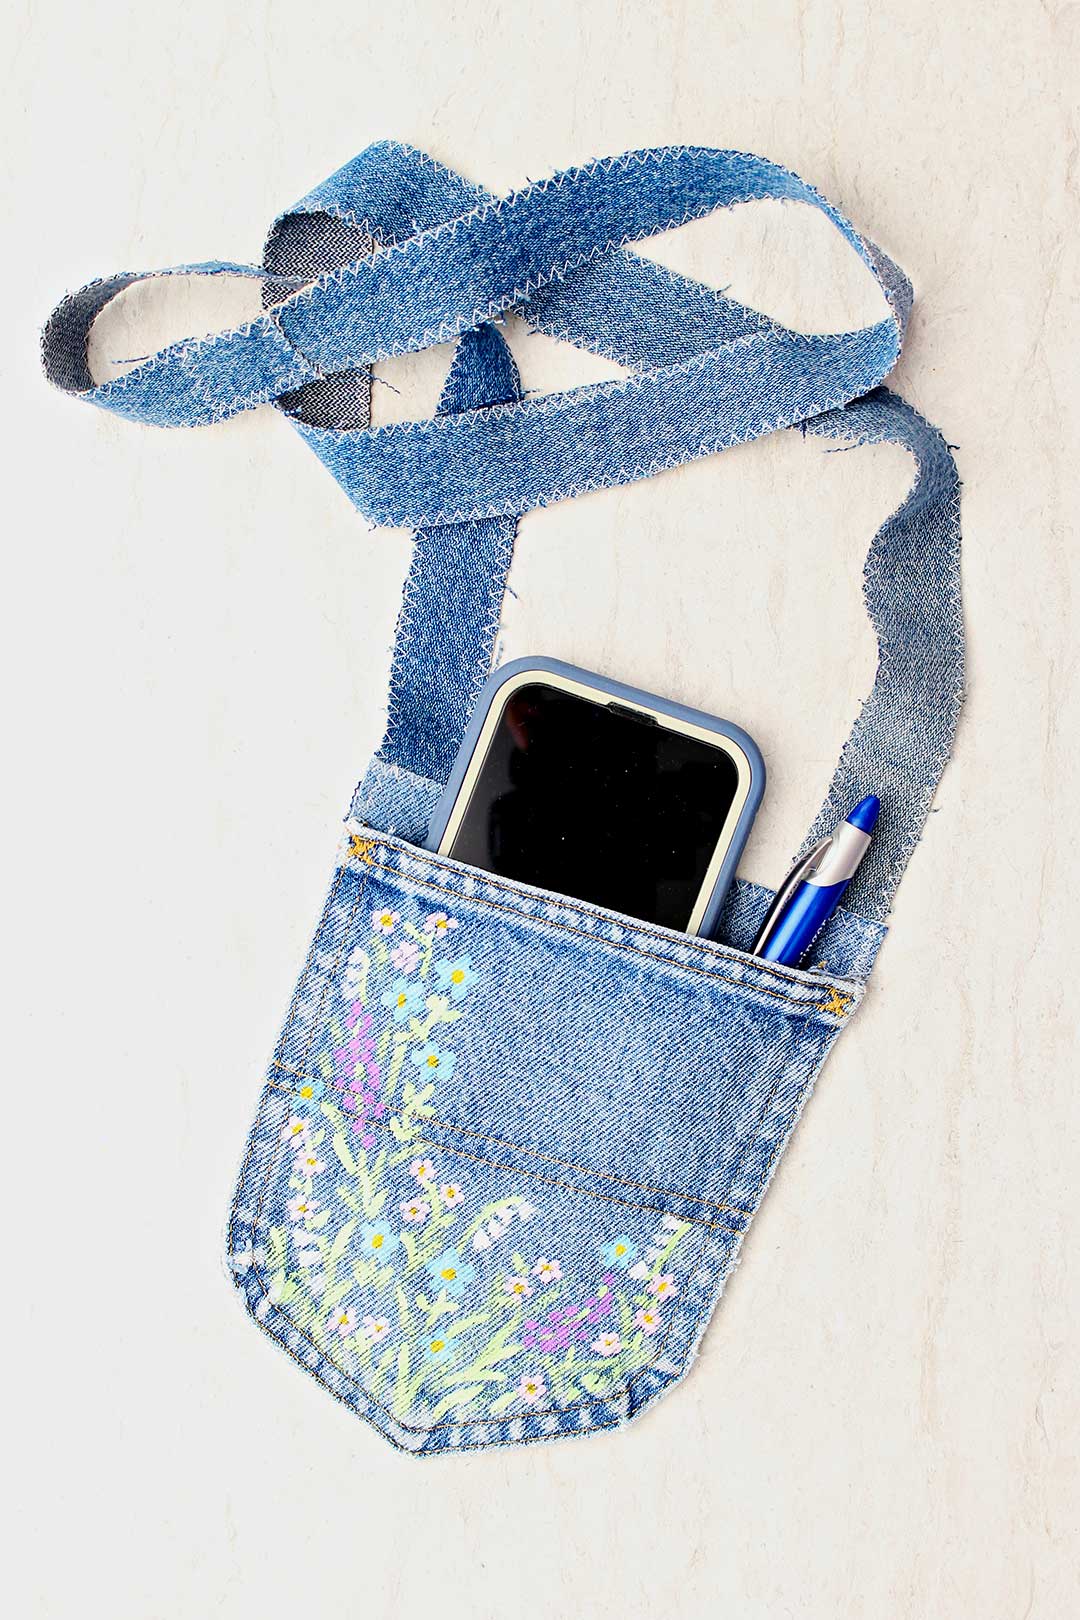 Completed jeans pocket purse with cell phone and pen inside.